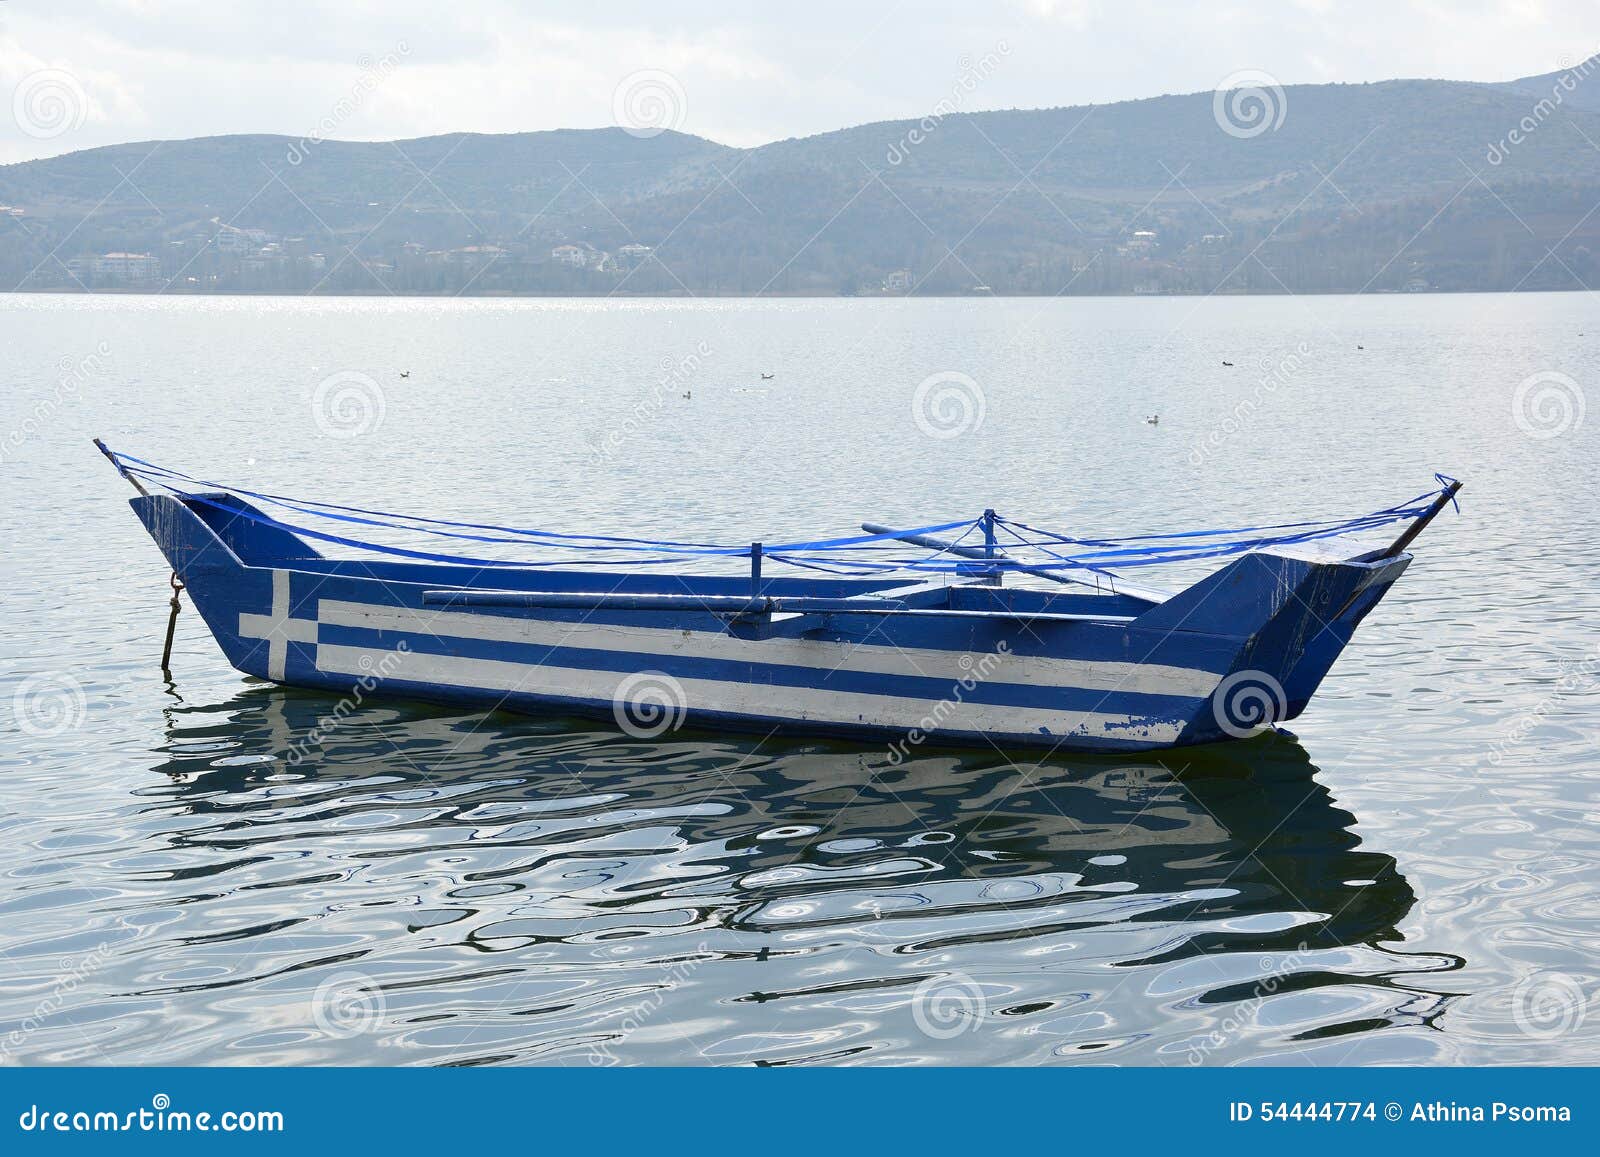  fishing boat, with greek flag painted on it, floating on lake waters